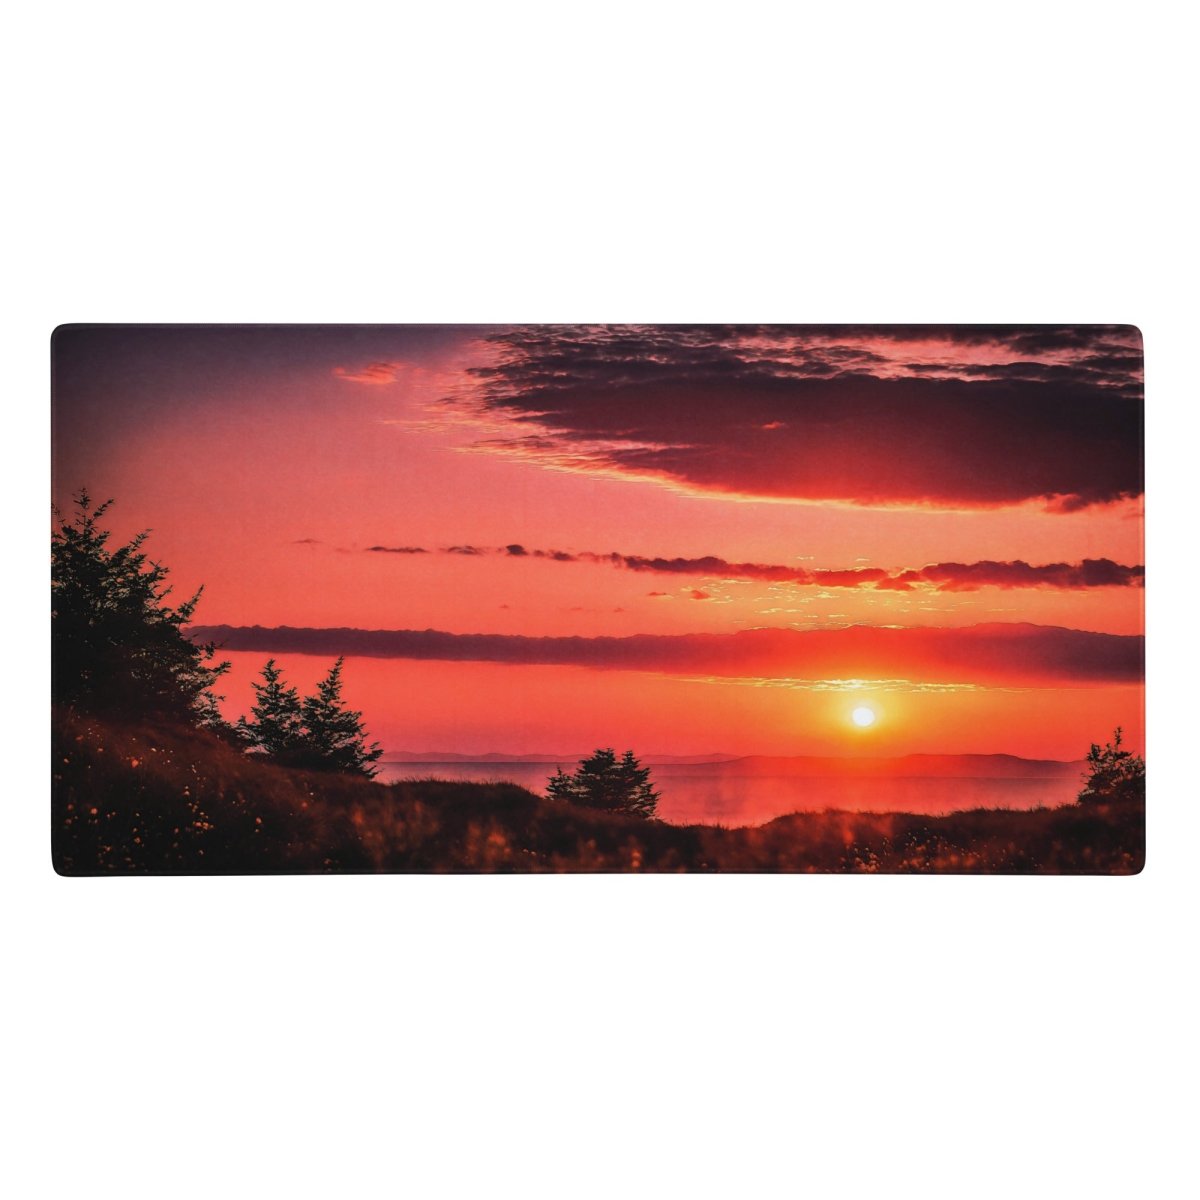 Sunset serenity - Gaming mouse pad - Ever colorful